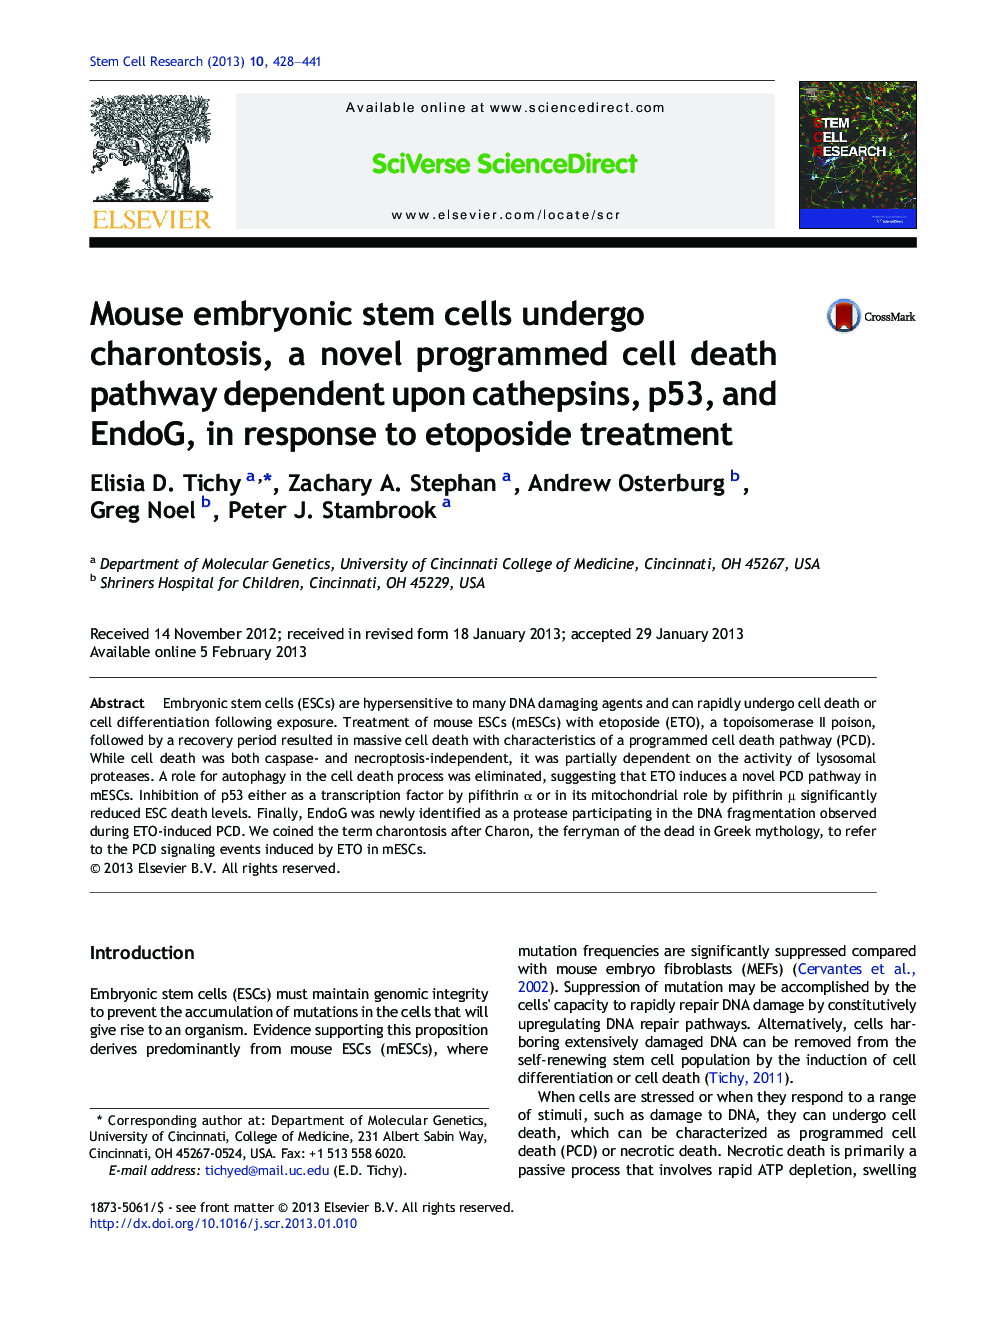 Mouse embryonic stem cells undergo charontosis, a novel programmed cell death pathway dependent upon cathepsins, p53, and EndoG, in response to etoposide treatment